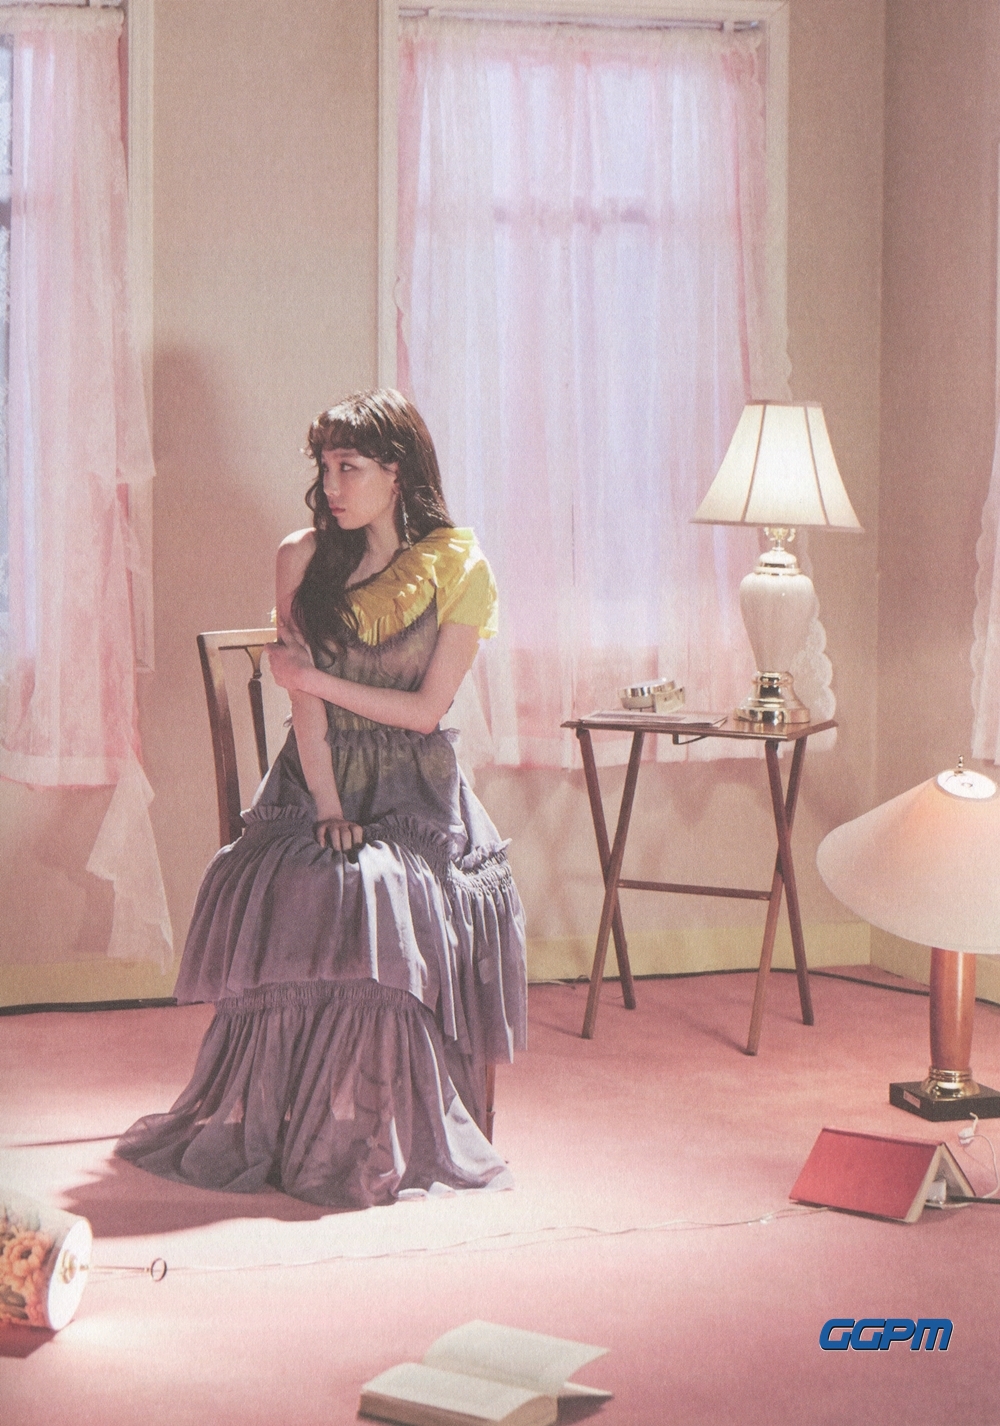 Taeyeon 1st Album 「my Voice Deluxe Edition 」 Booklet